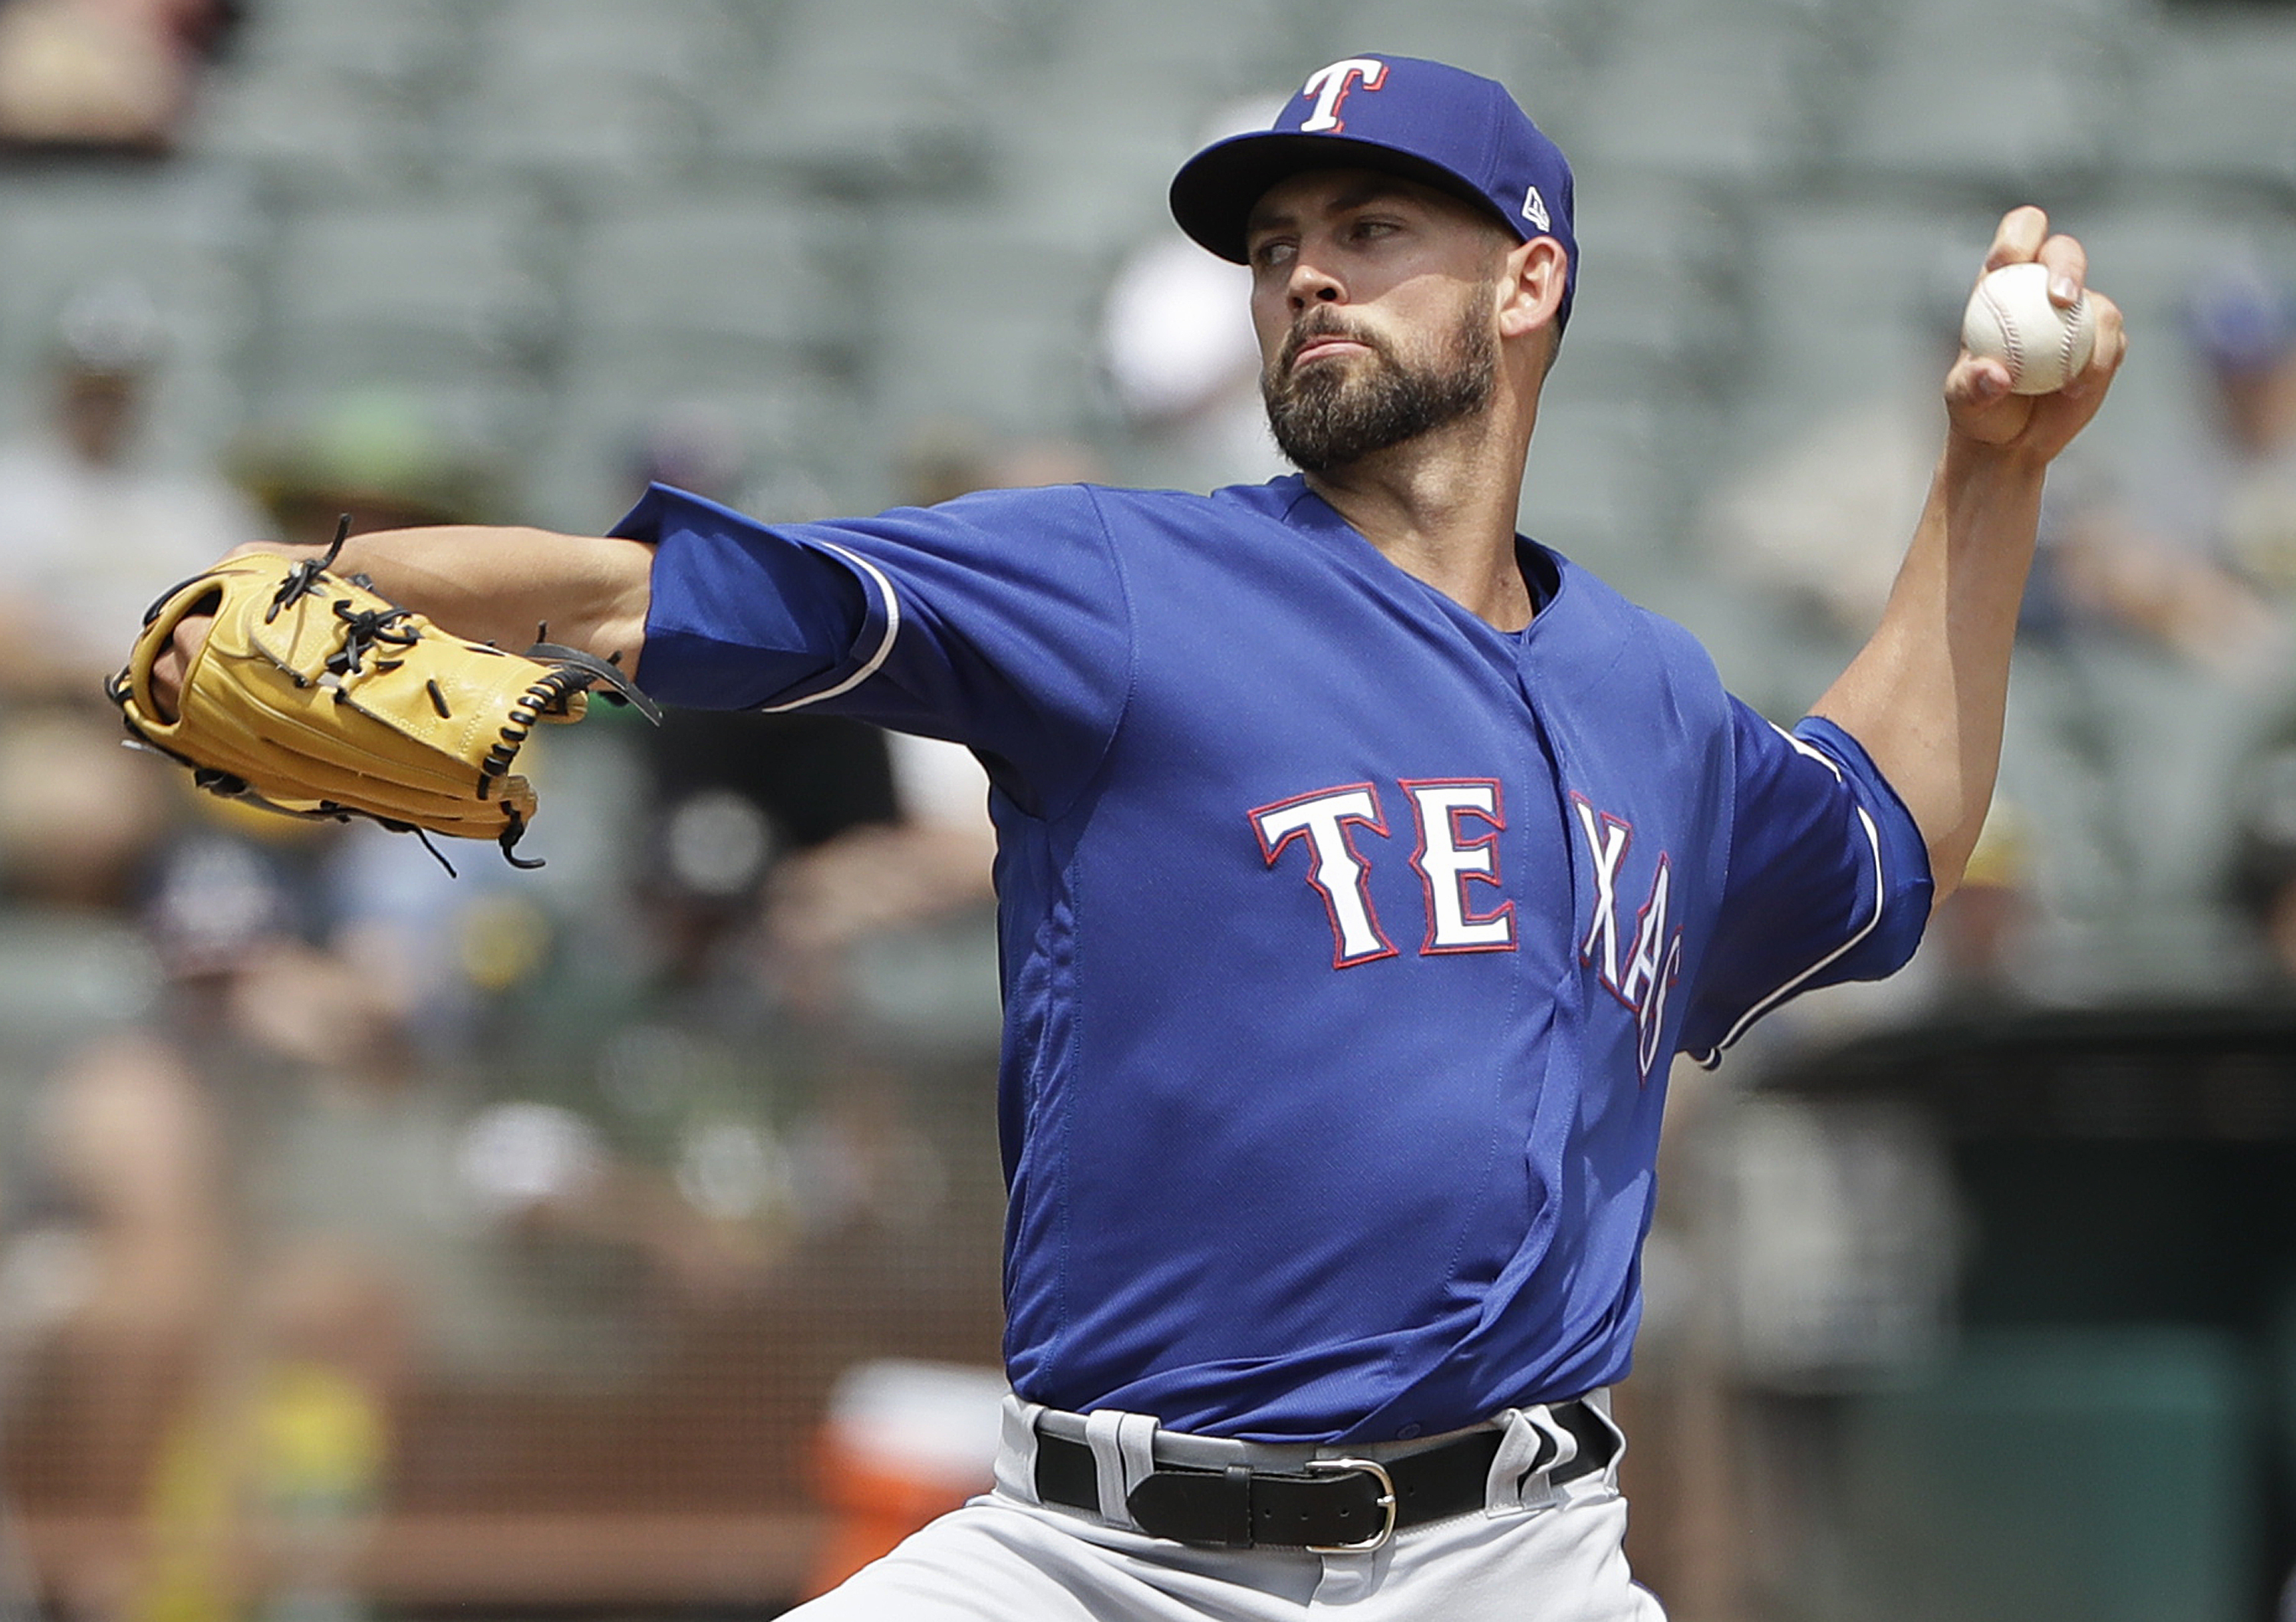 Rangers go deep twice to back Minor in 4-2 win over A’s